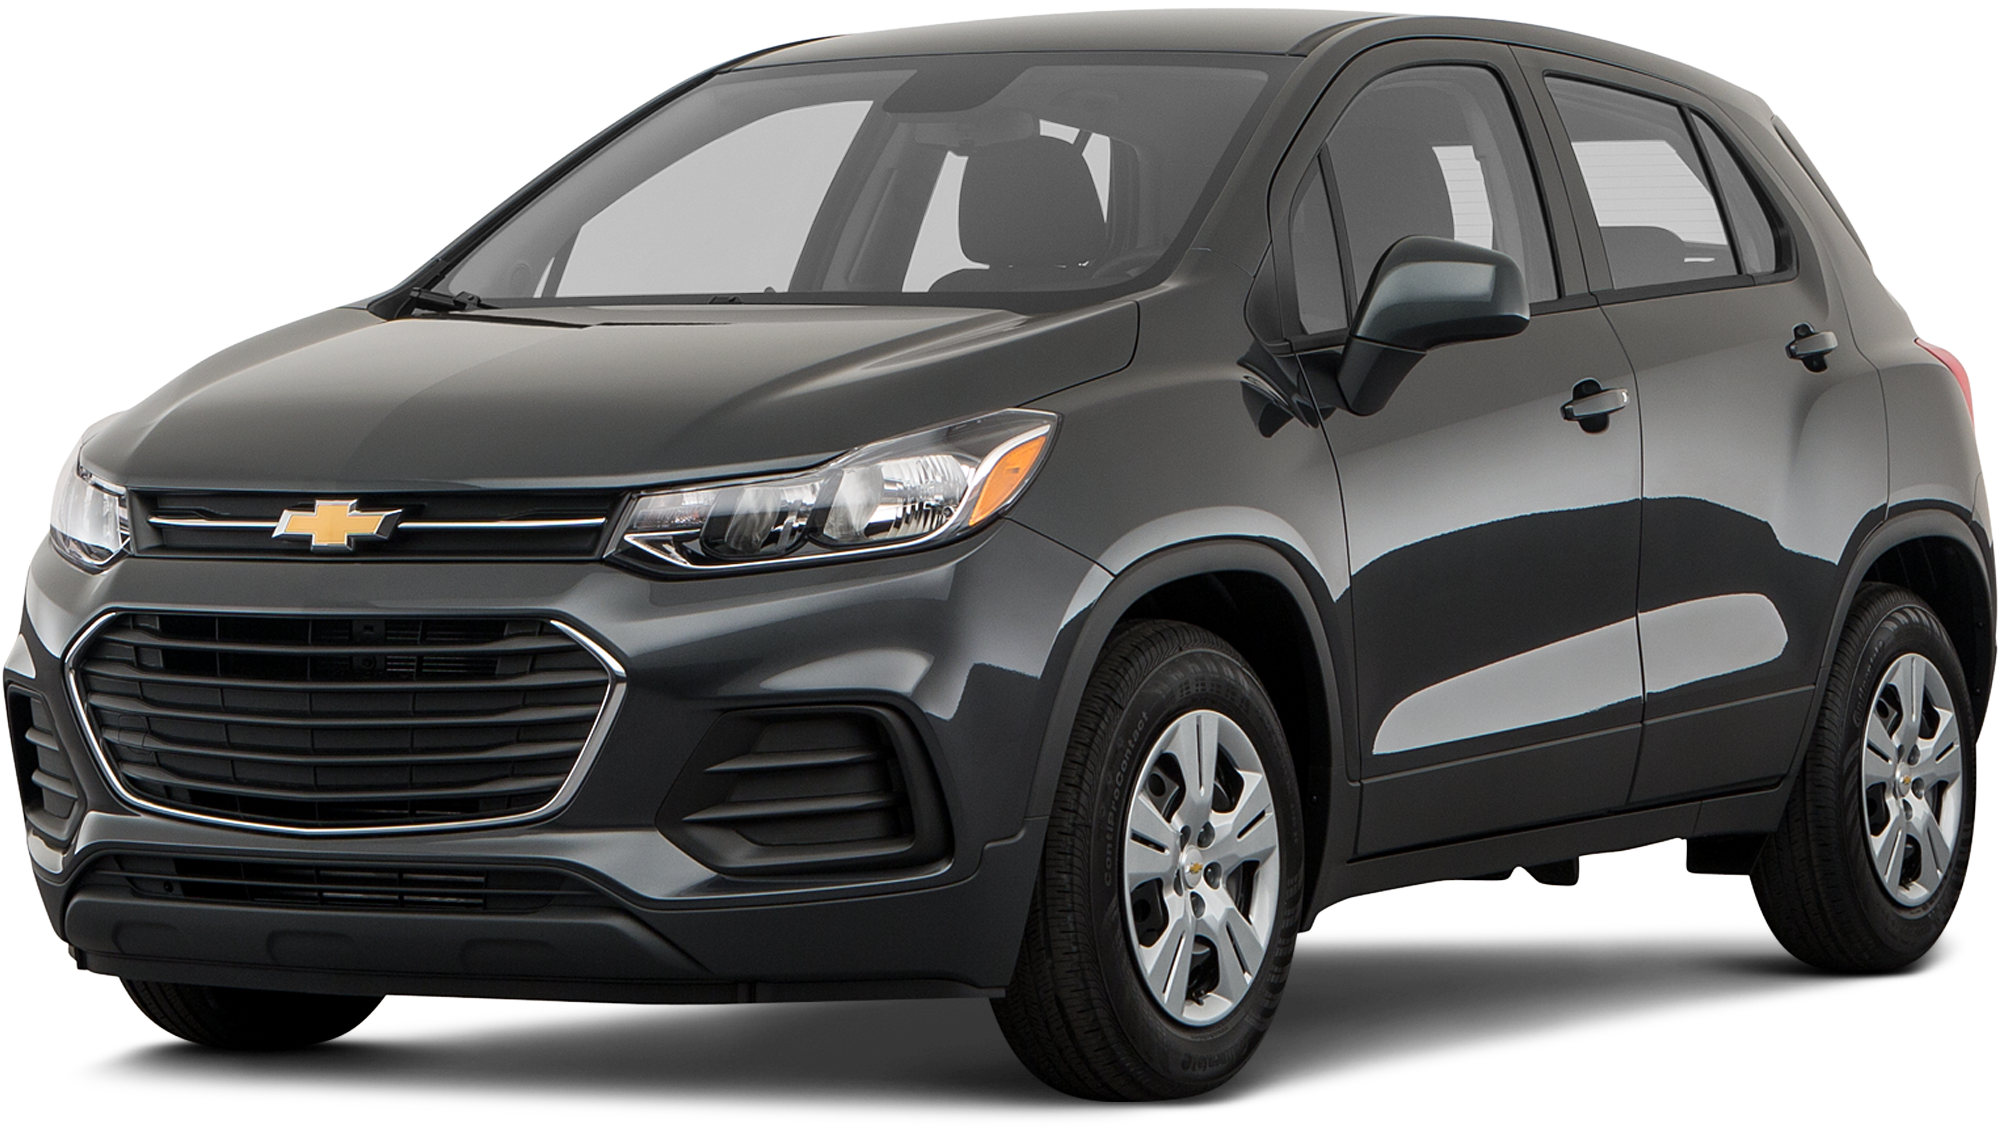 2020 Chevrolet Trax Incentives, Specials & Offers in Danvers MA